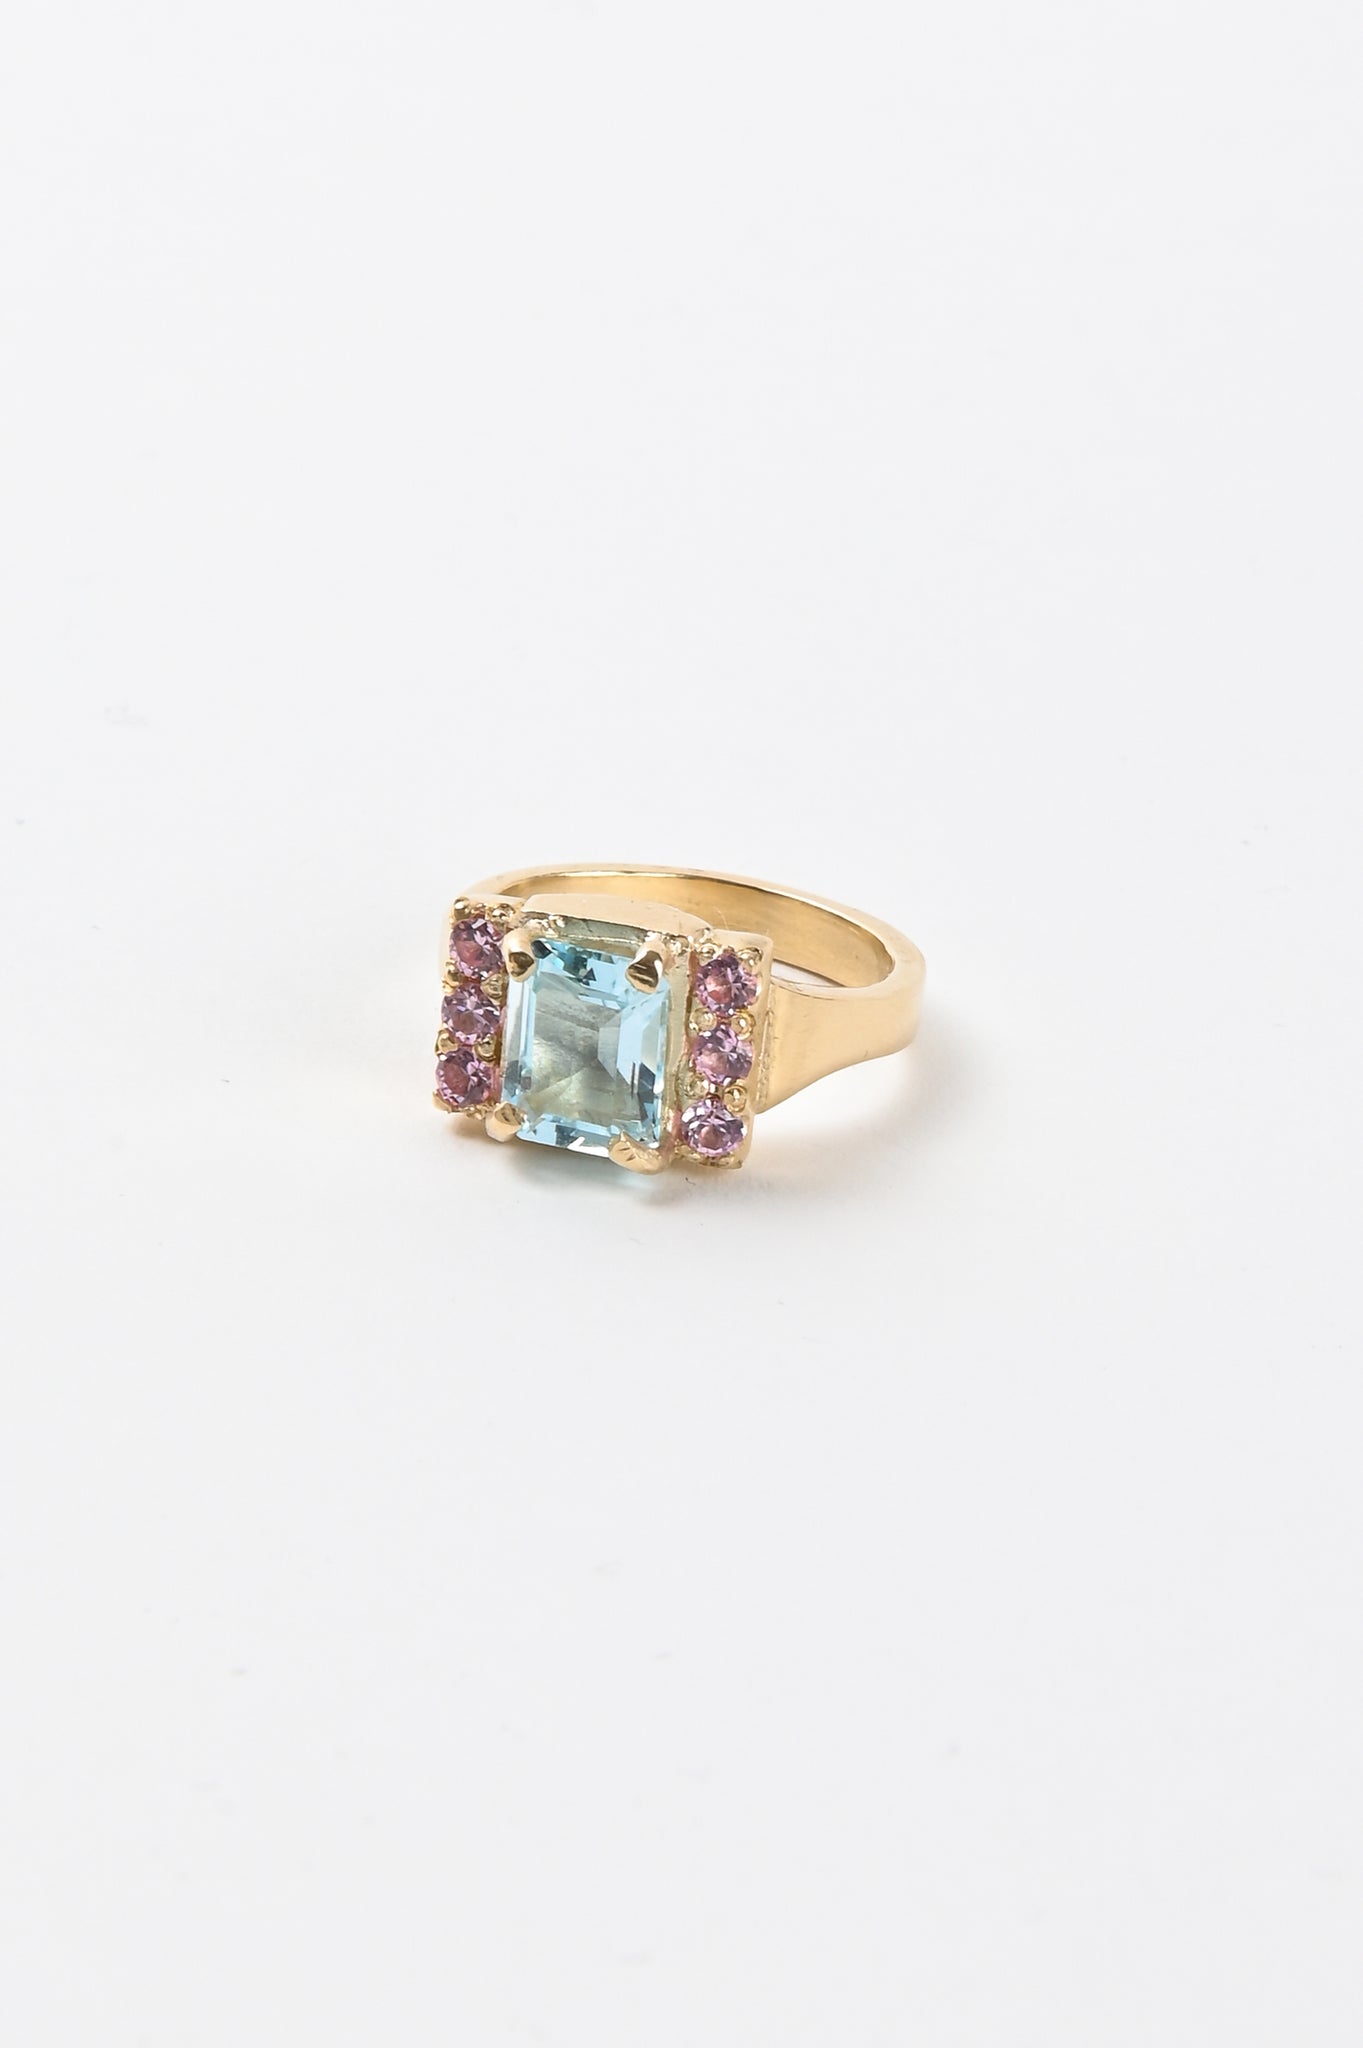 Oliver Thomas 'Priscilla' Ring With Blue Topaz In 9ct Gold